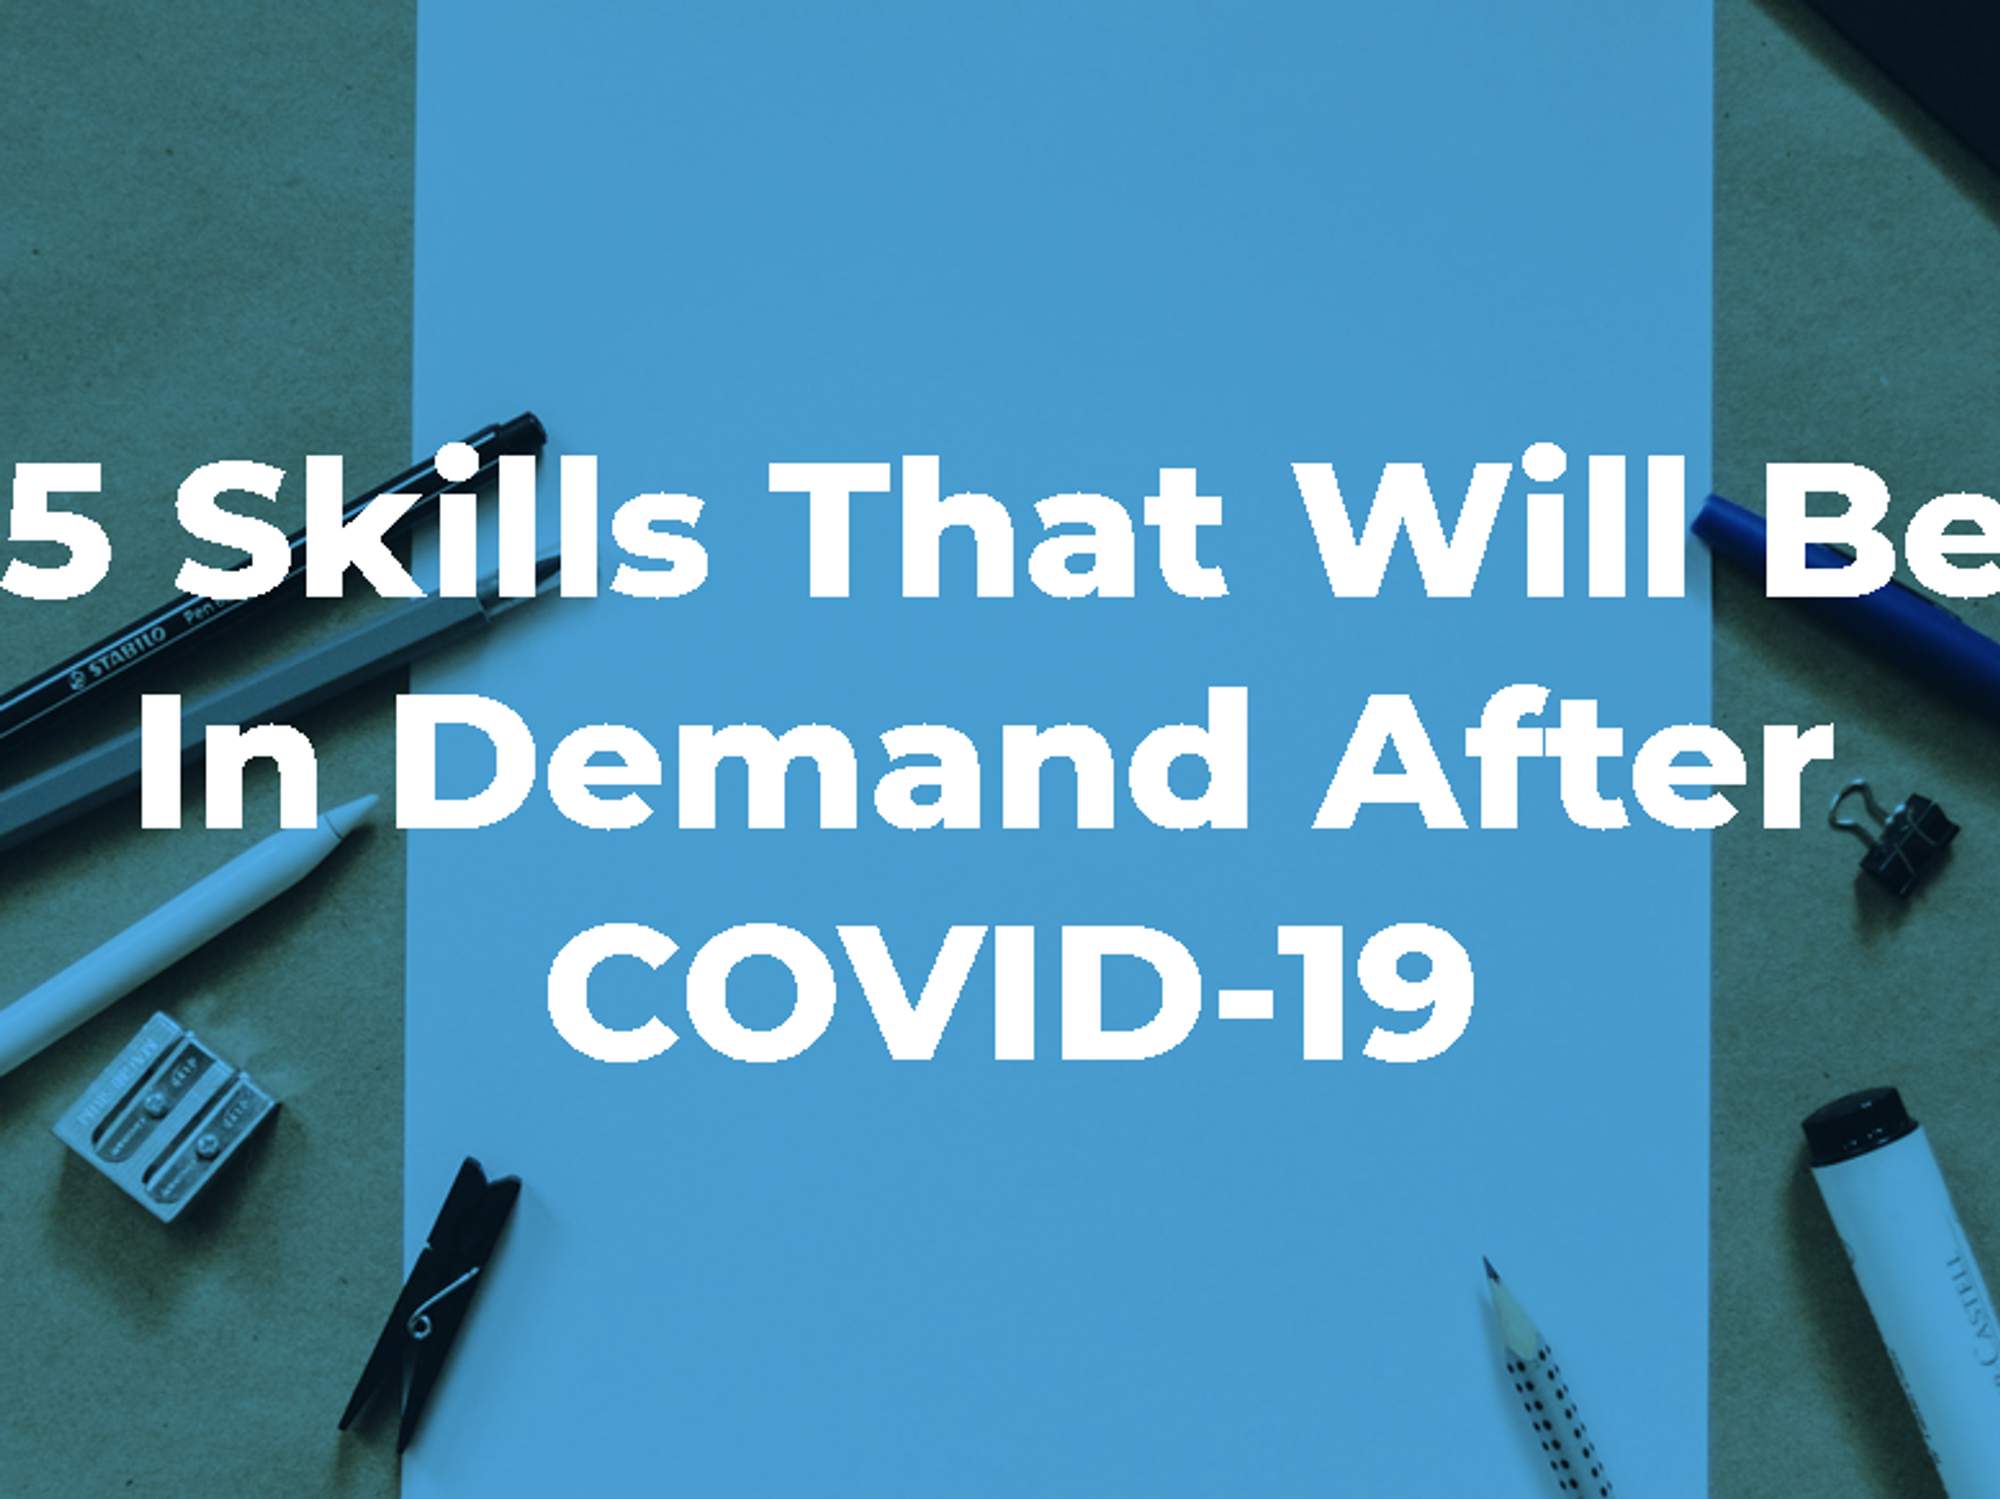 5 Skills That Will Be In Demand After COVID-19